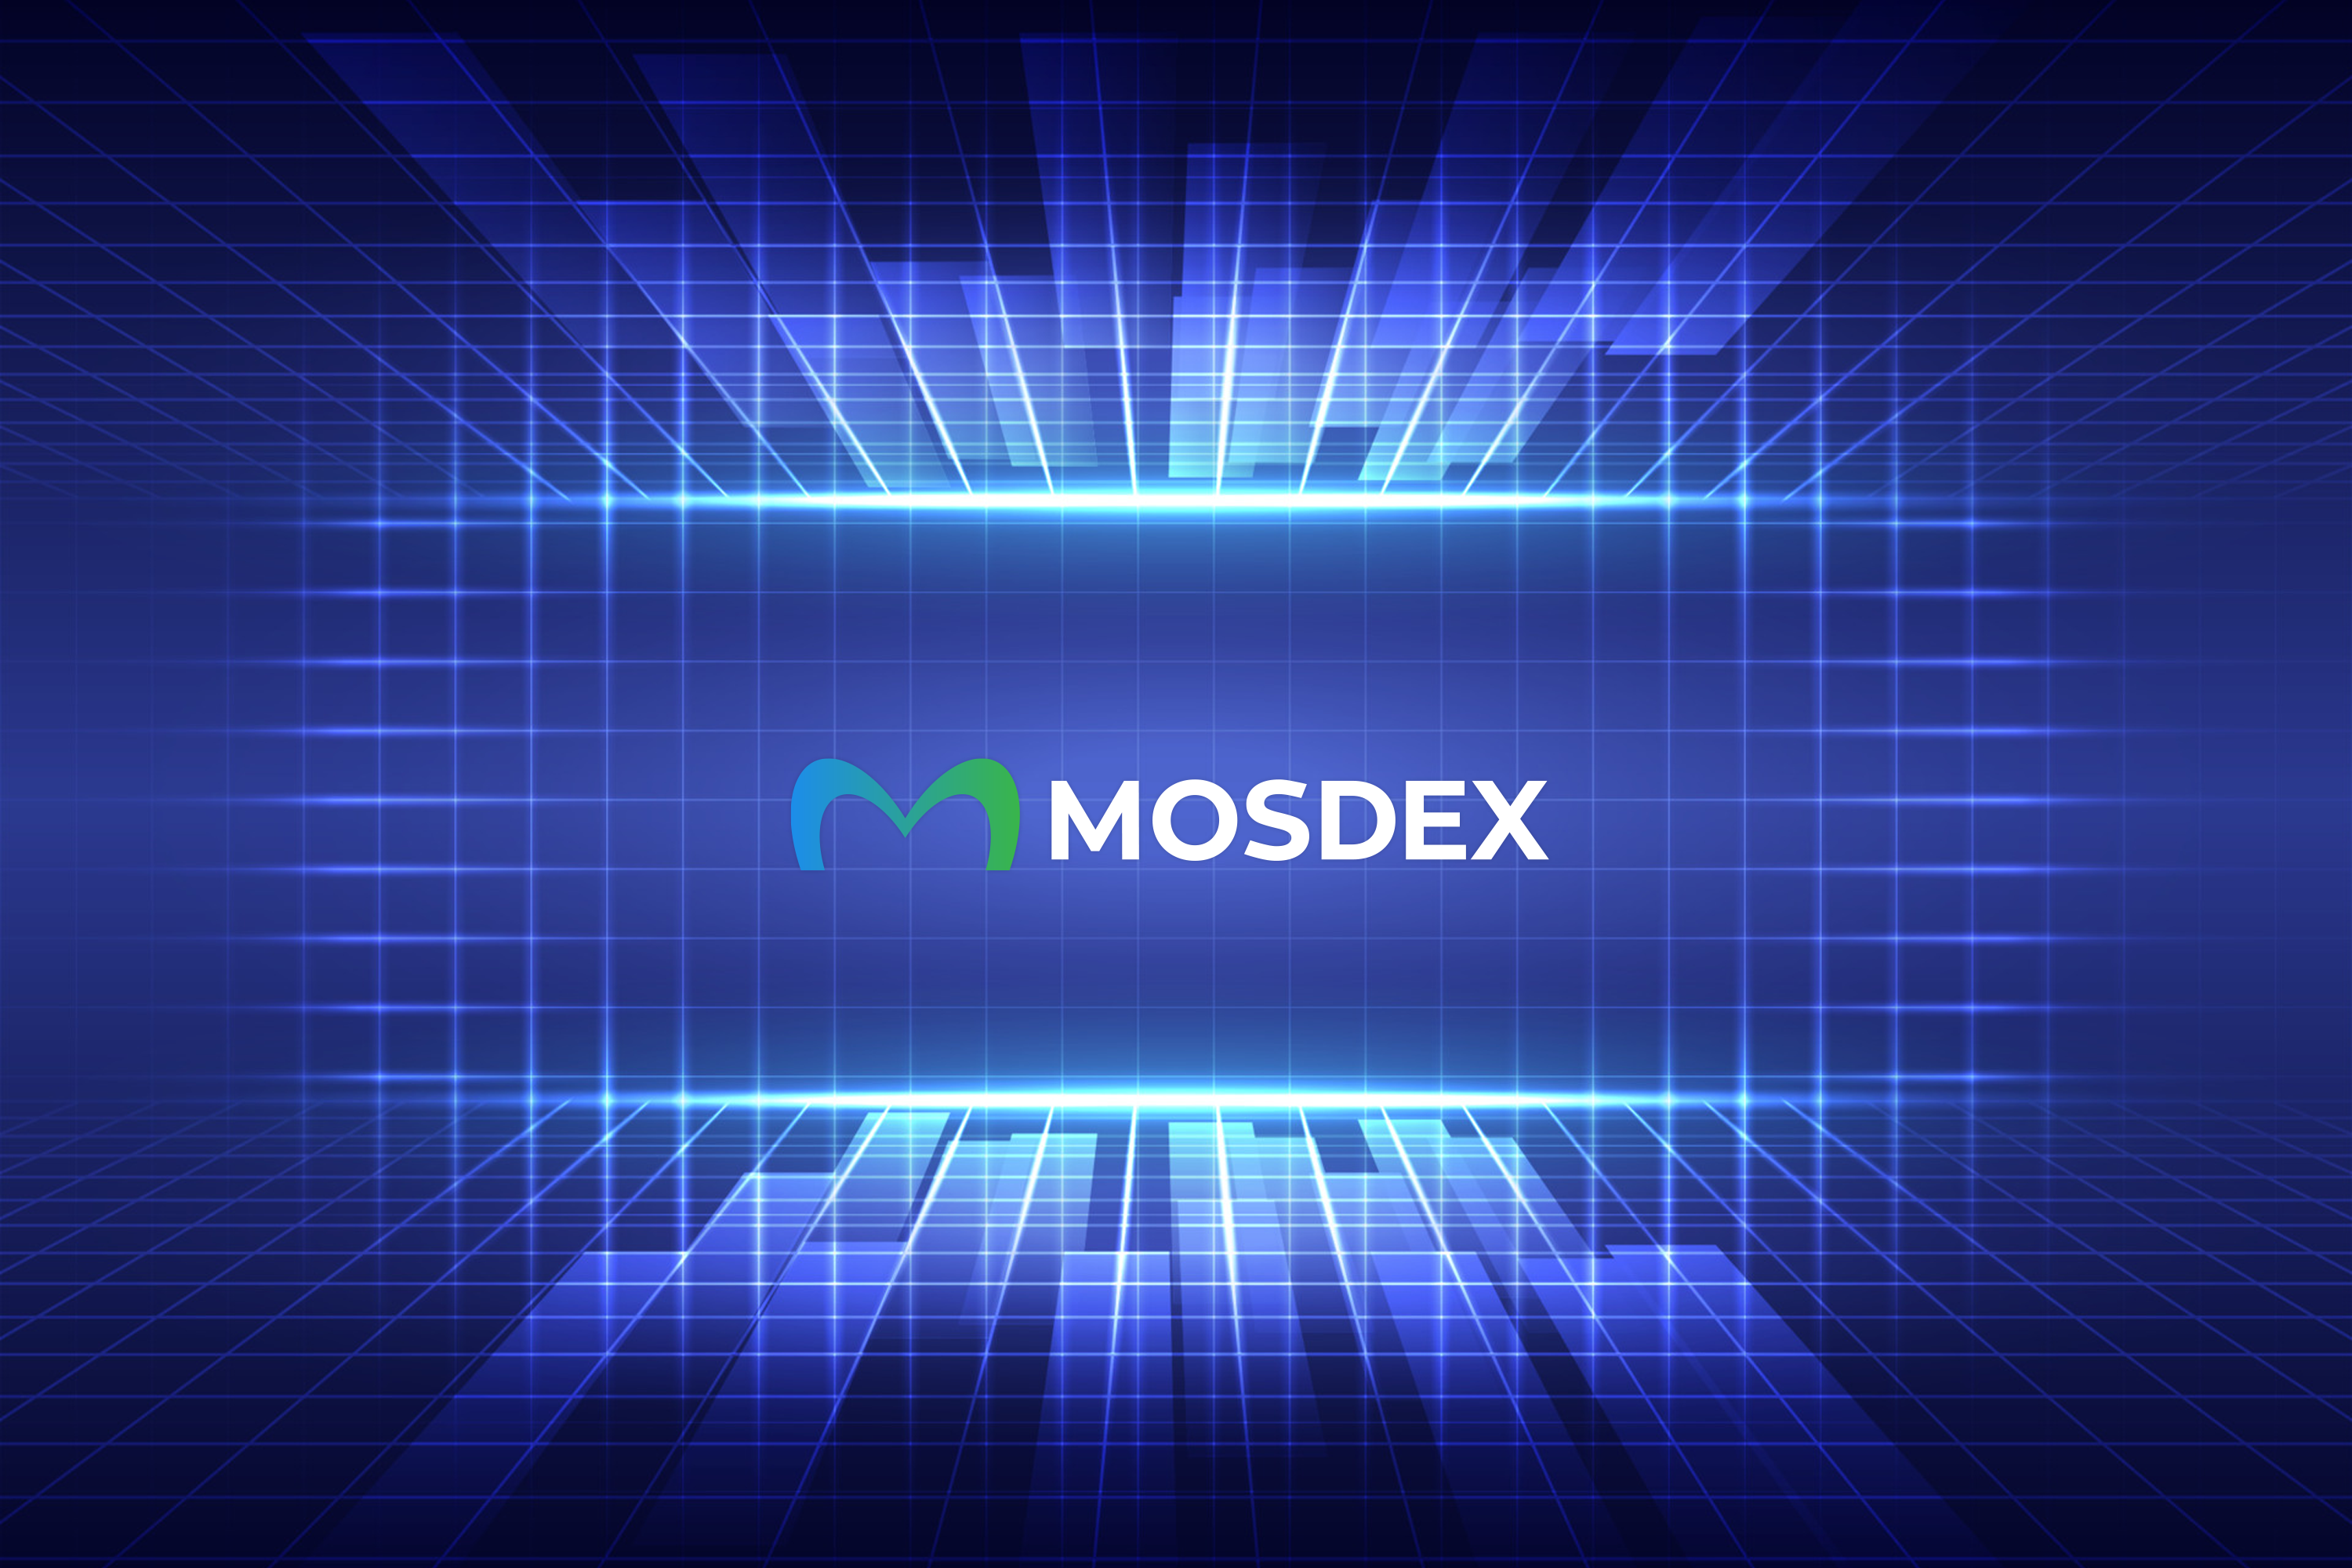 @joelagbo/an-interactive-review-of-mosdex